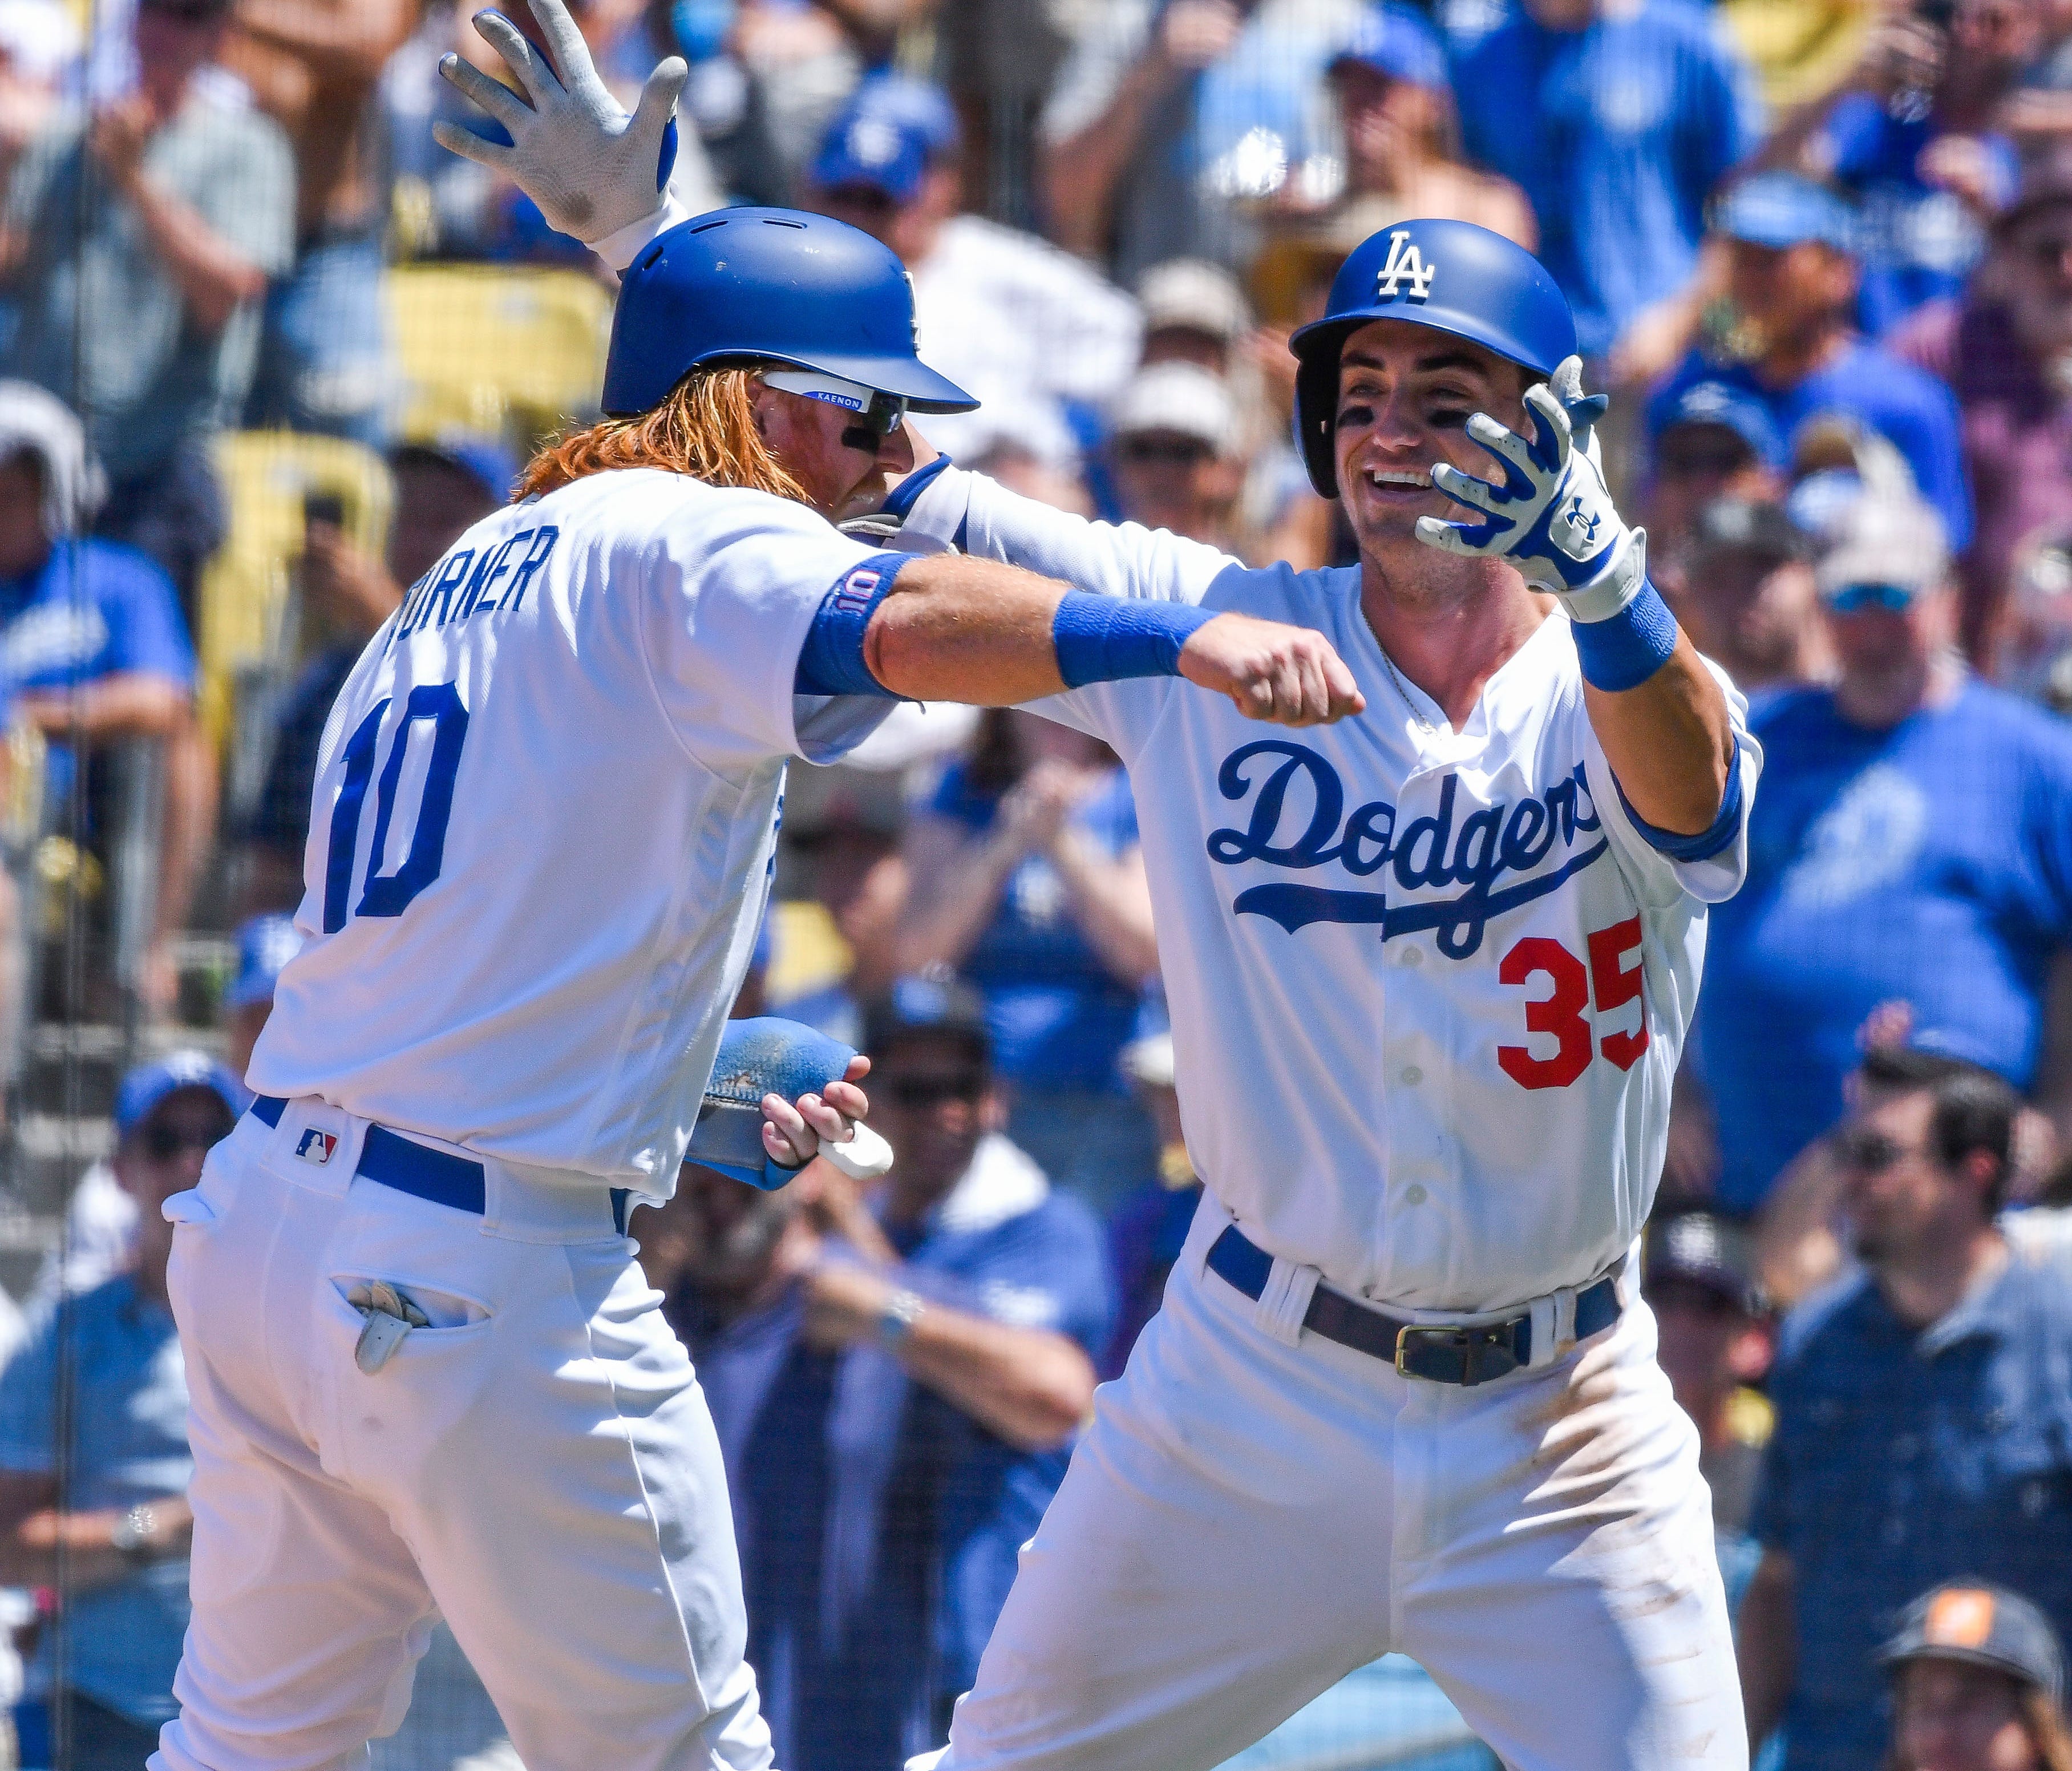 Cody Bellinger, Justin Turner and the Dodgers are on a wild home run binge.